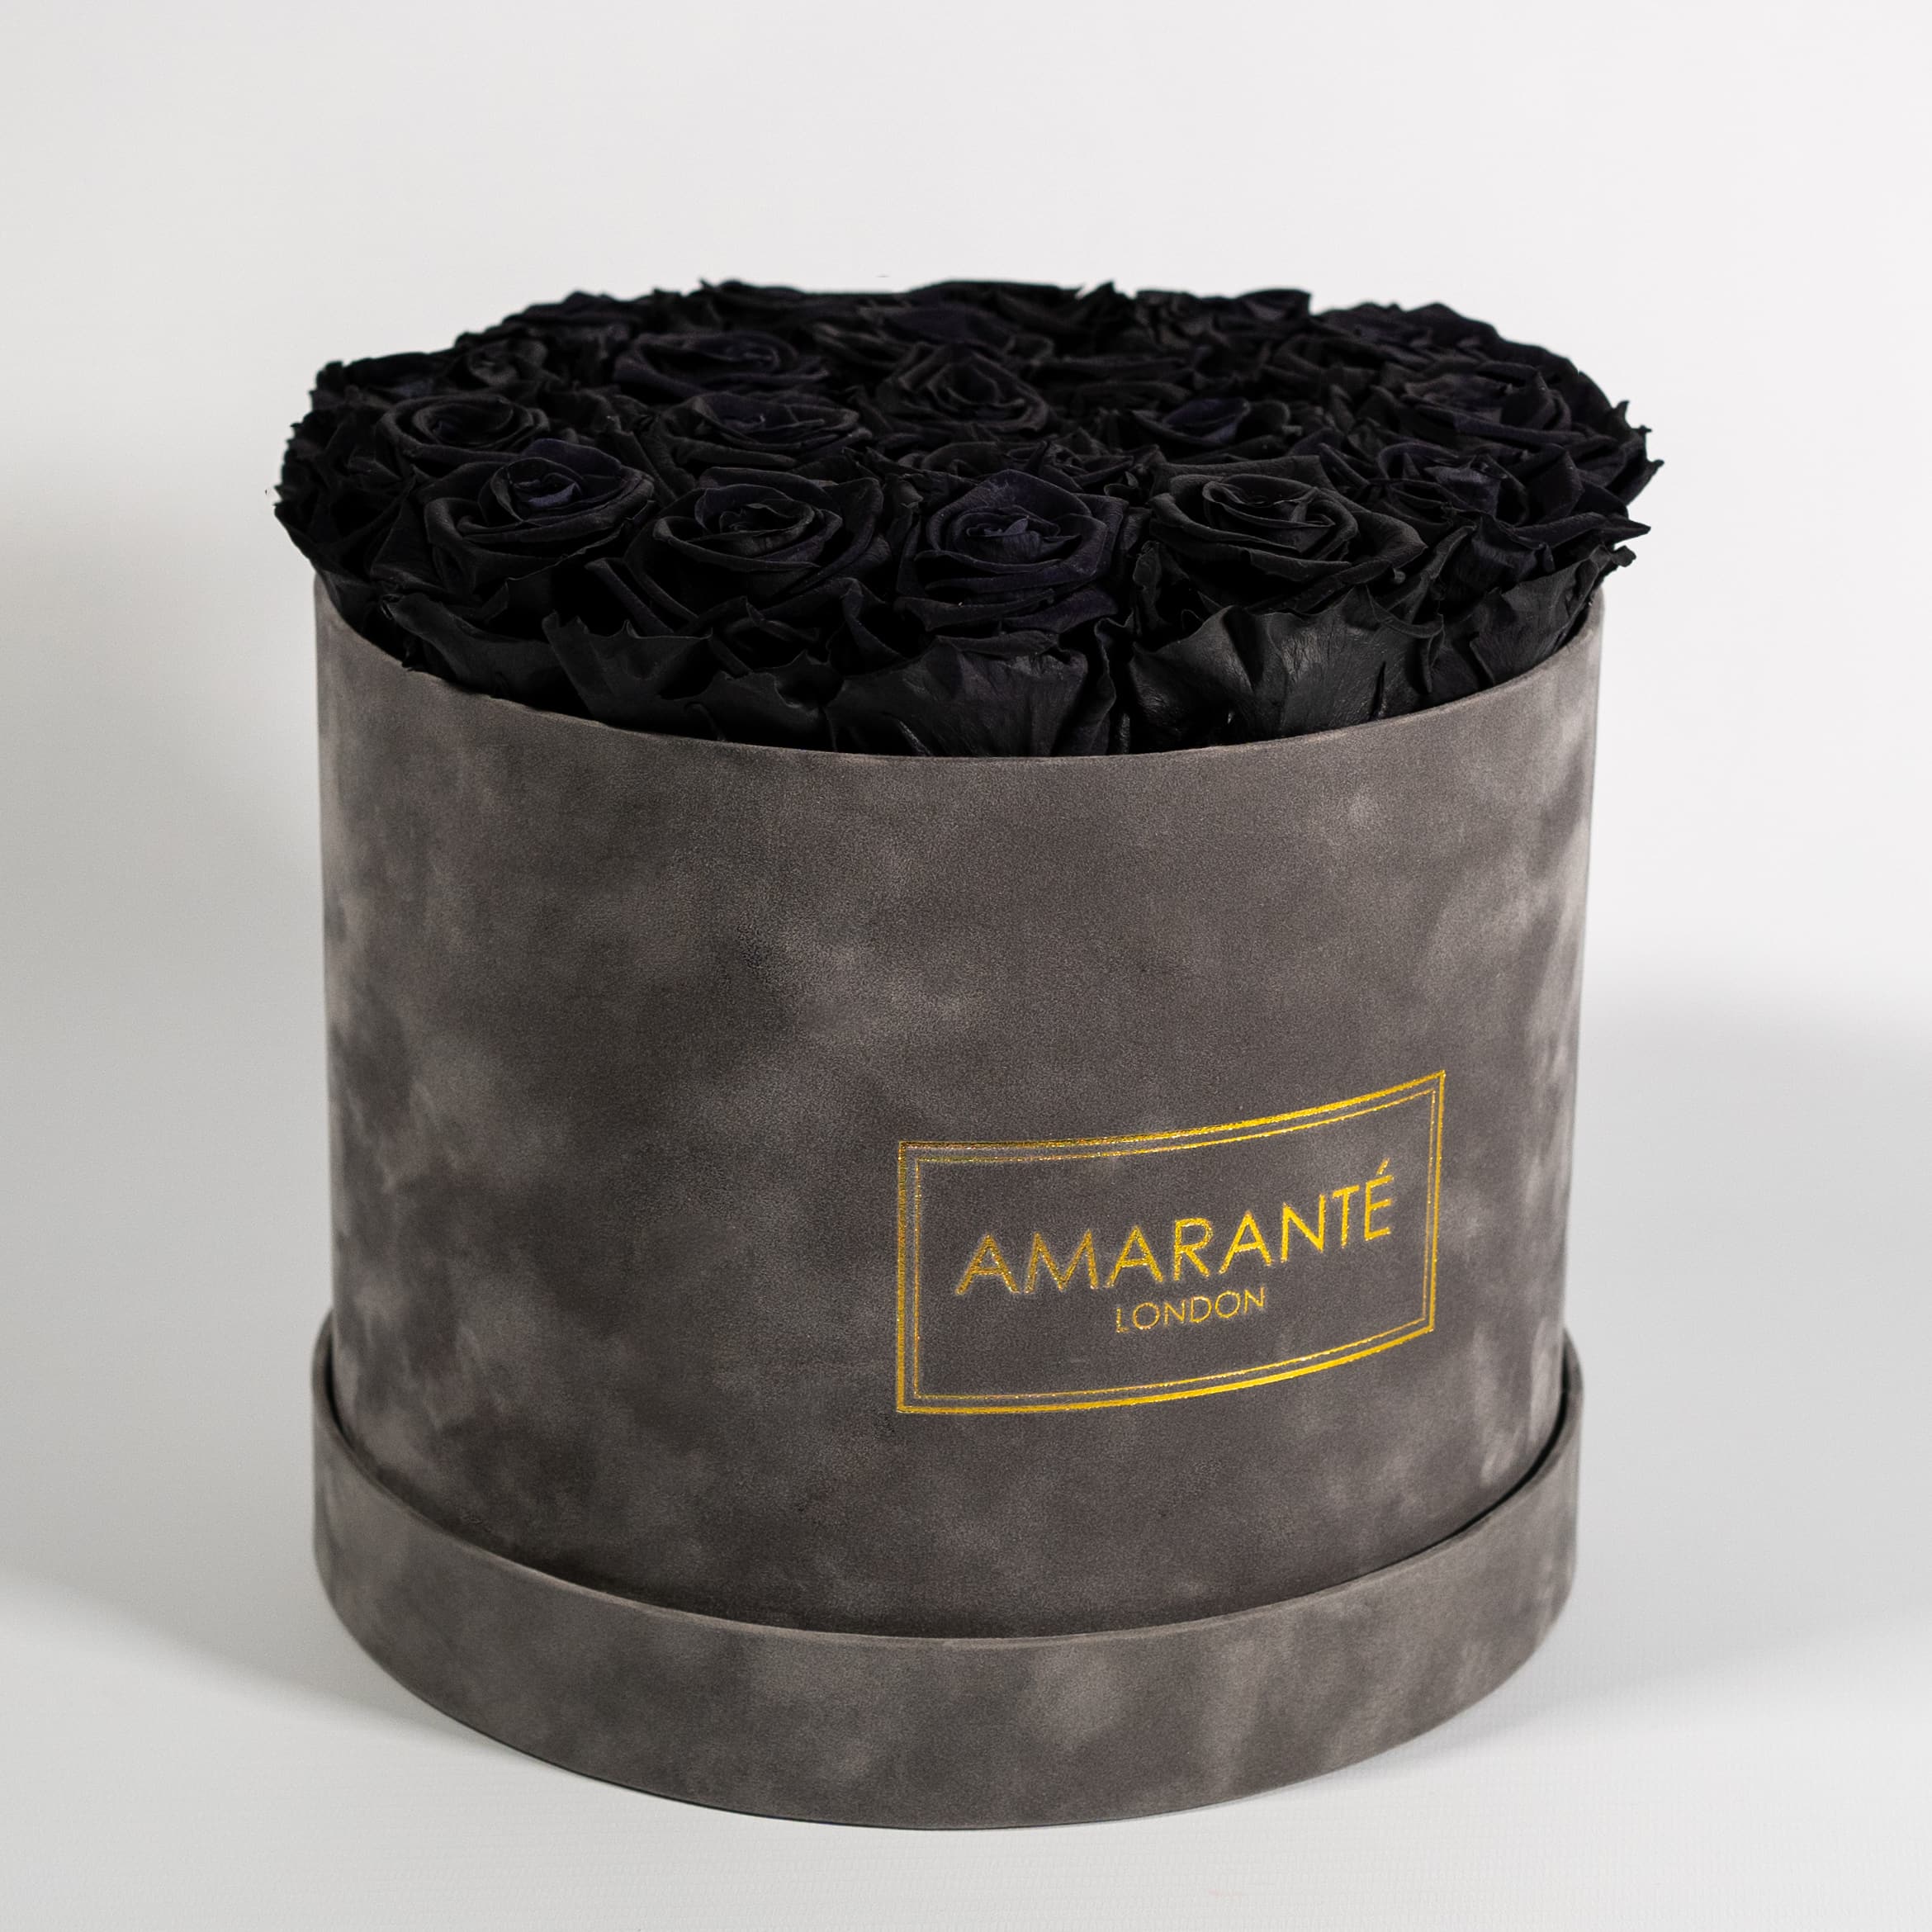 Bold black Roses accessible in a chic grey large box